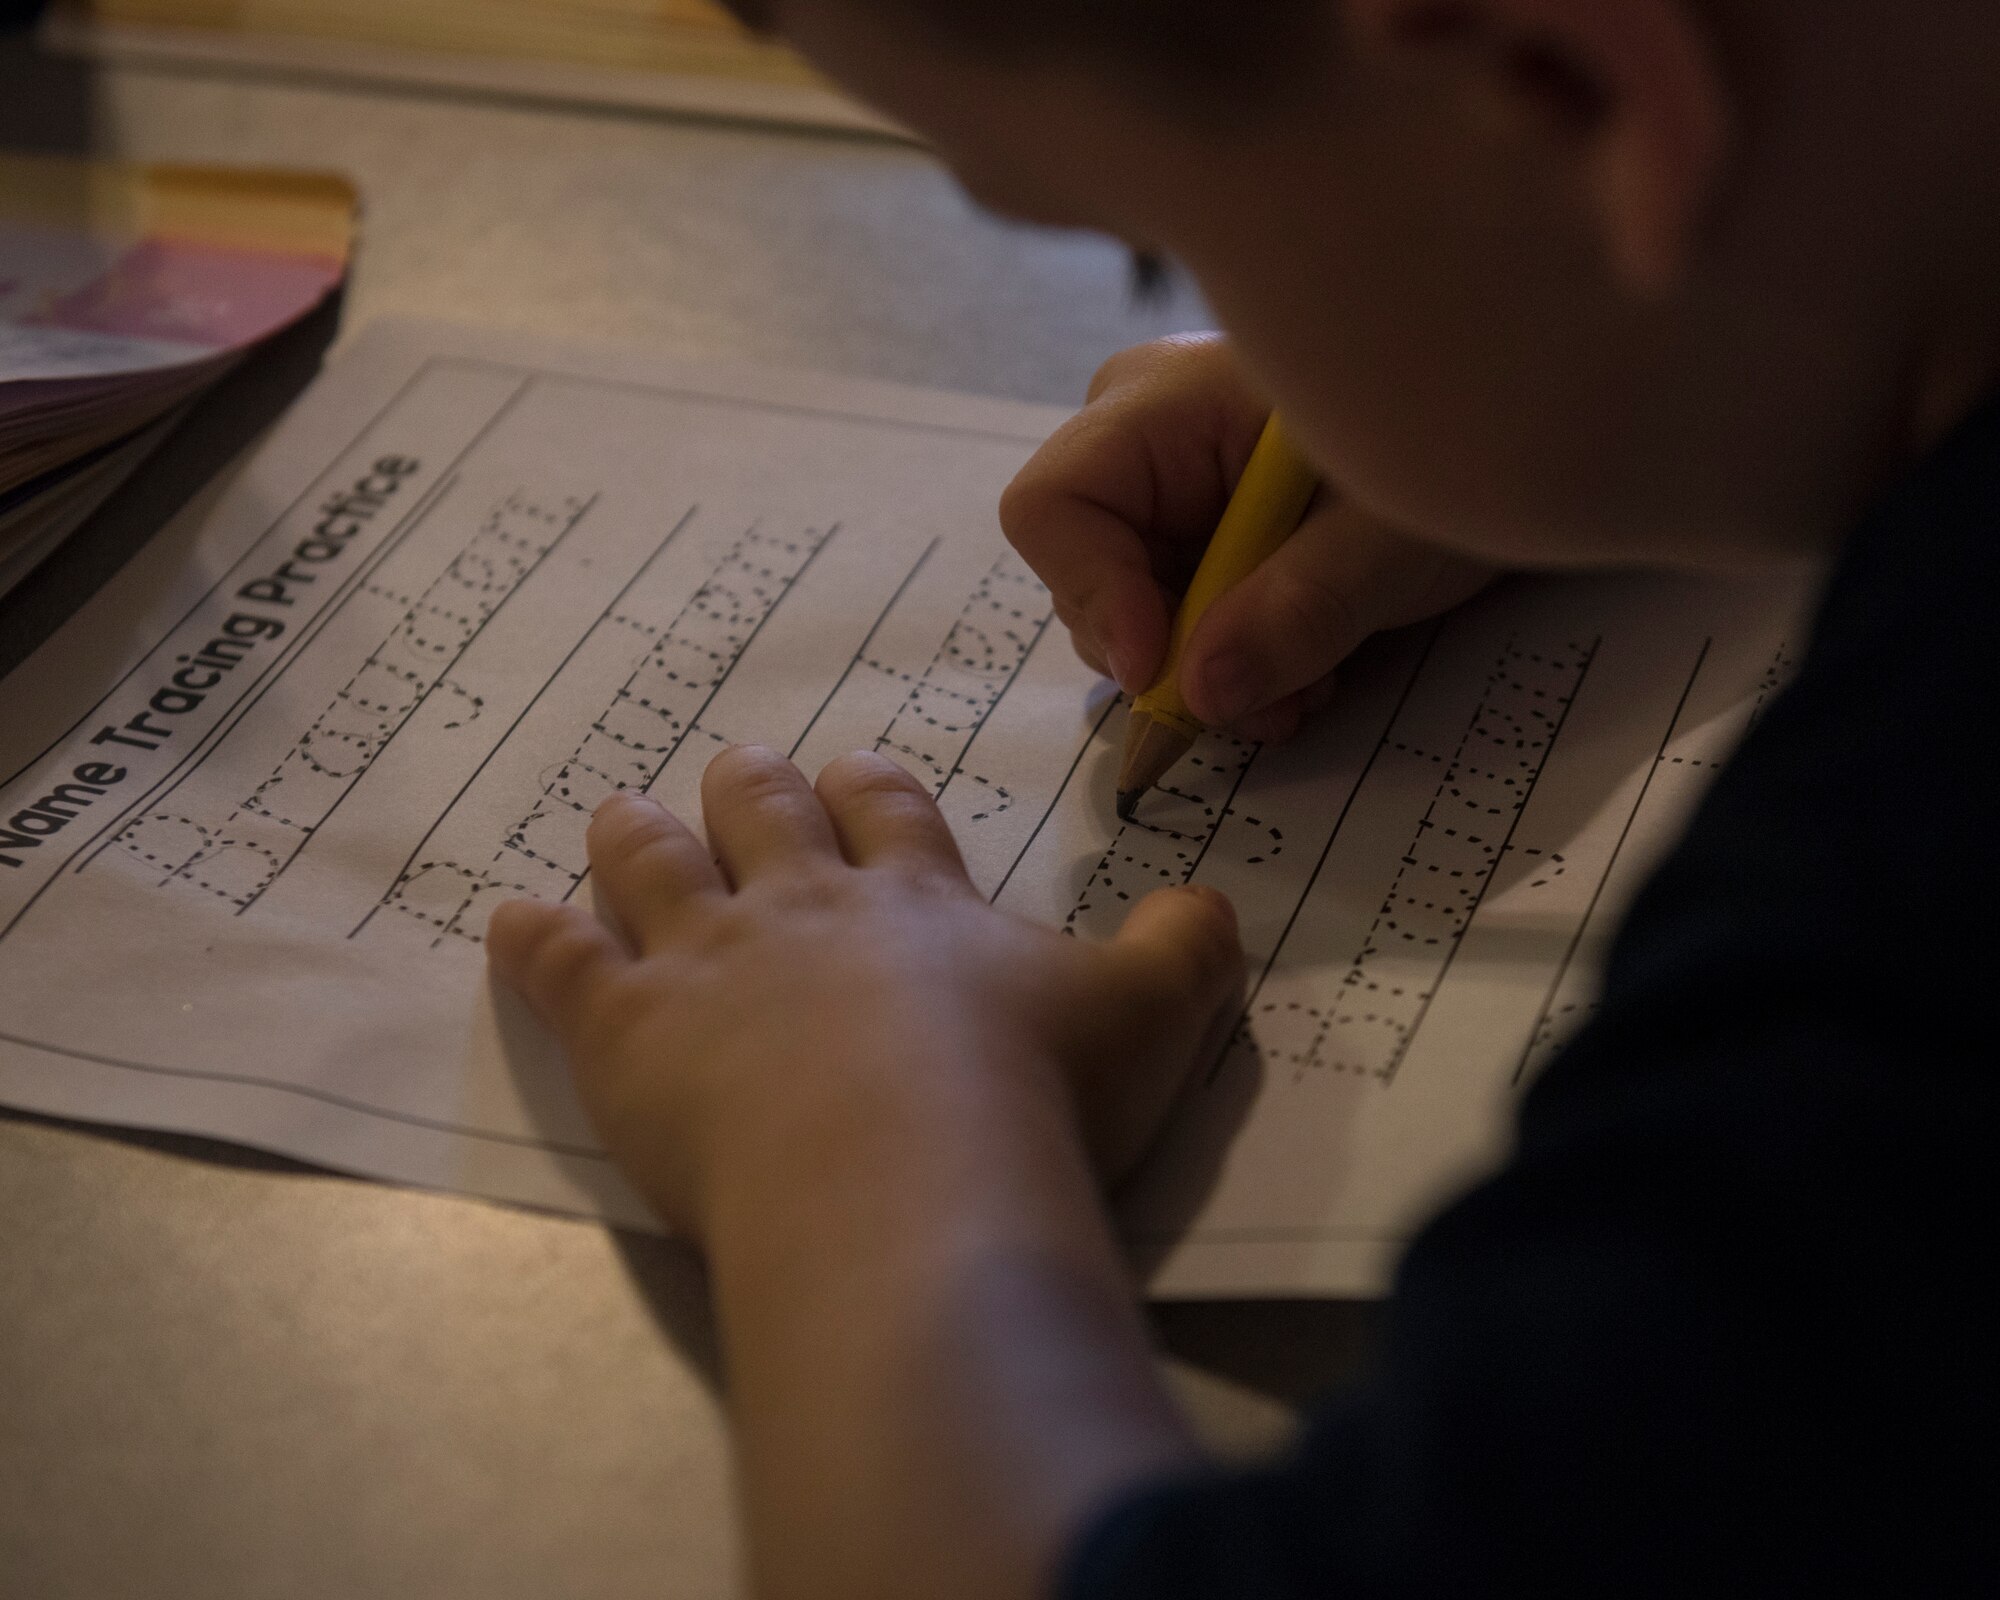 Team Fairchild child practices arithmetic at a Family Child Care program provider’s house at Fairchild Air Force Base, Washington, Aug. 16, 2018. The FCC offers families an option of a consistent and personal learning space for child care in an in-home environment. (U.S. Air Force photo/Airman 1st Class Whitney Laine)